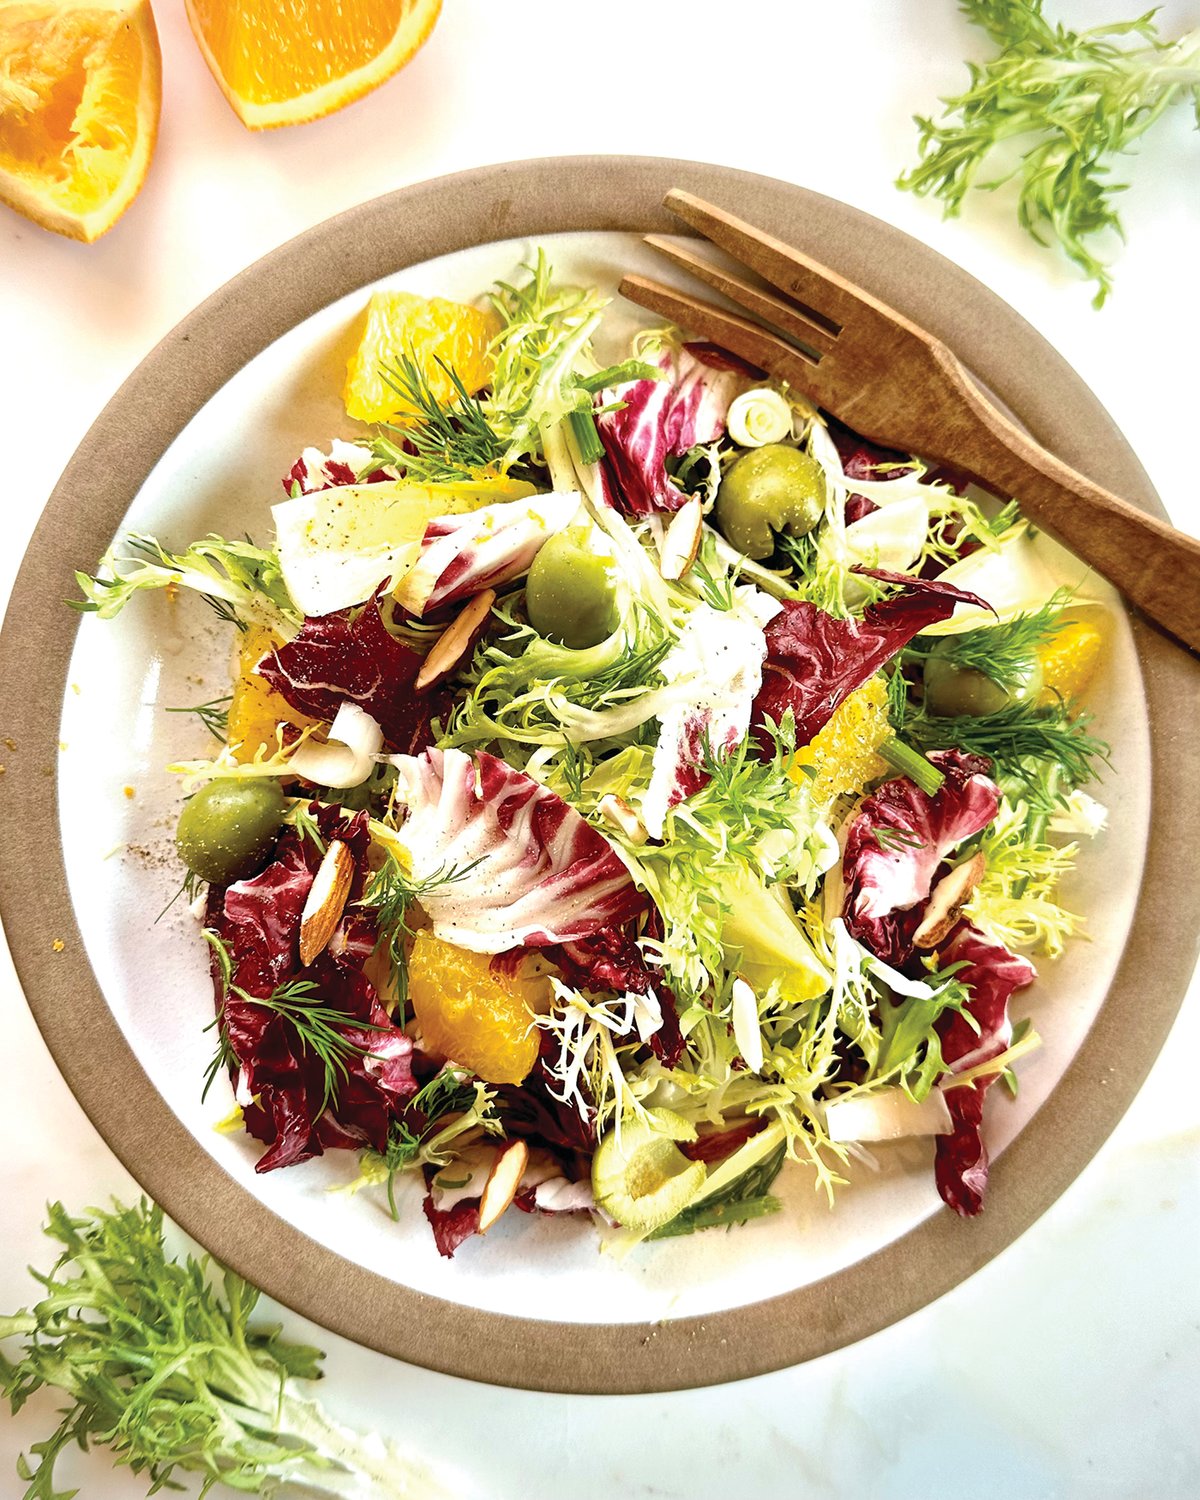 This salad is bright and fruity, with bitter and sweet notes. It